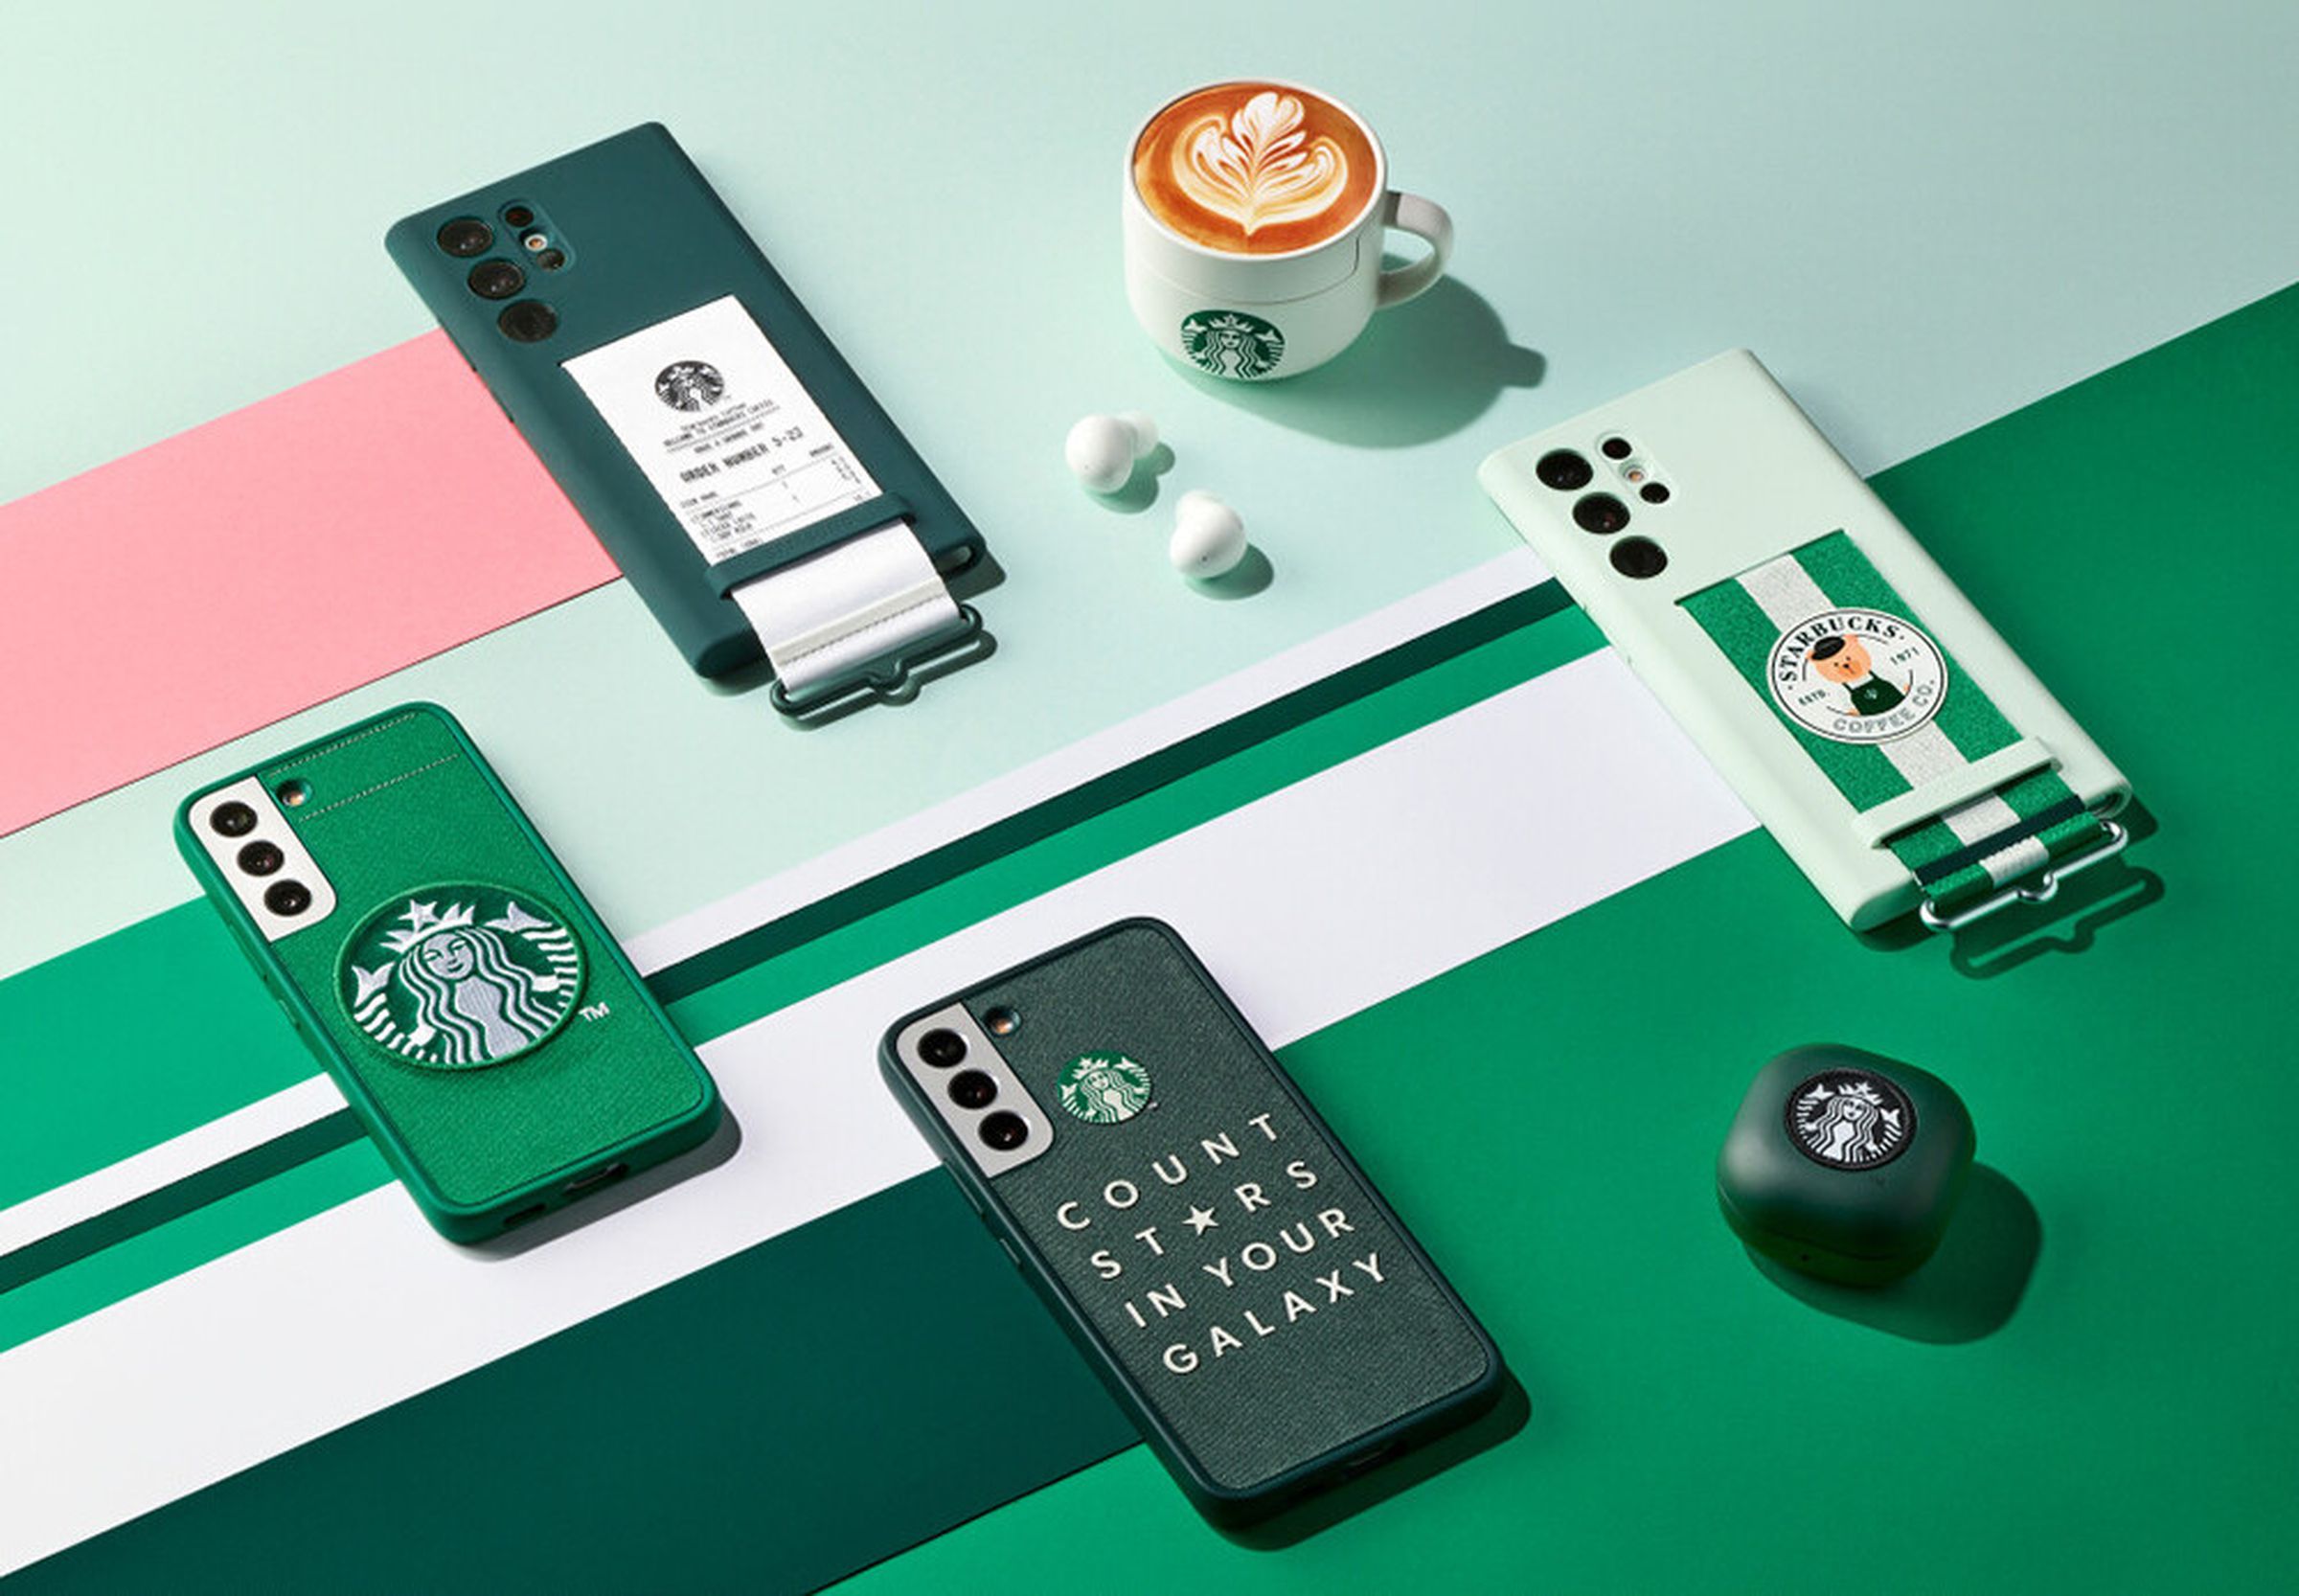 Samsung’s Starbucks collab brought a bunch of new cases... some more interesting than others.